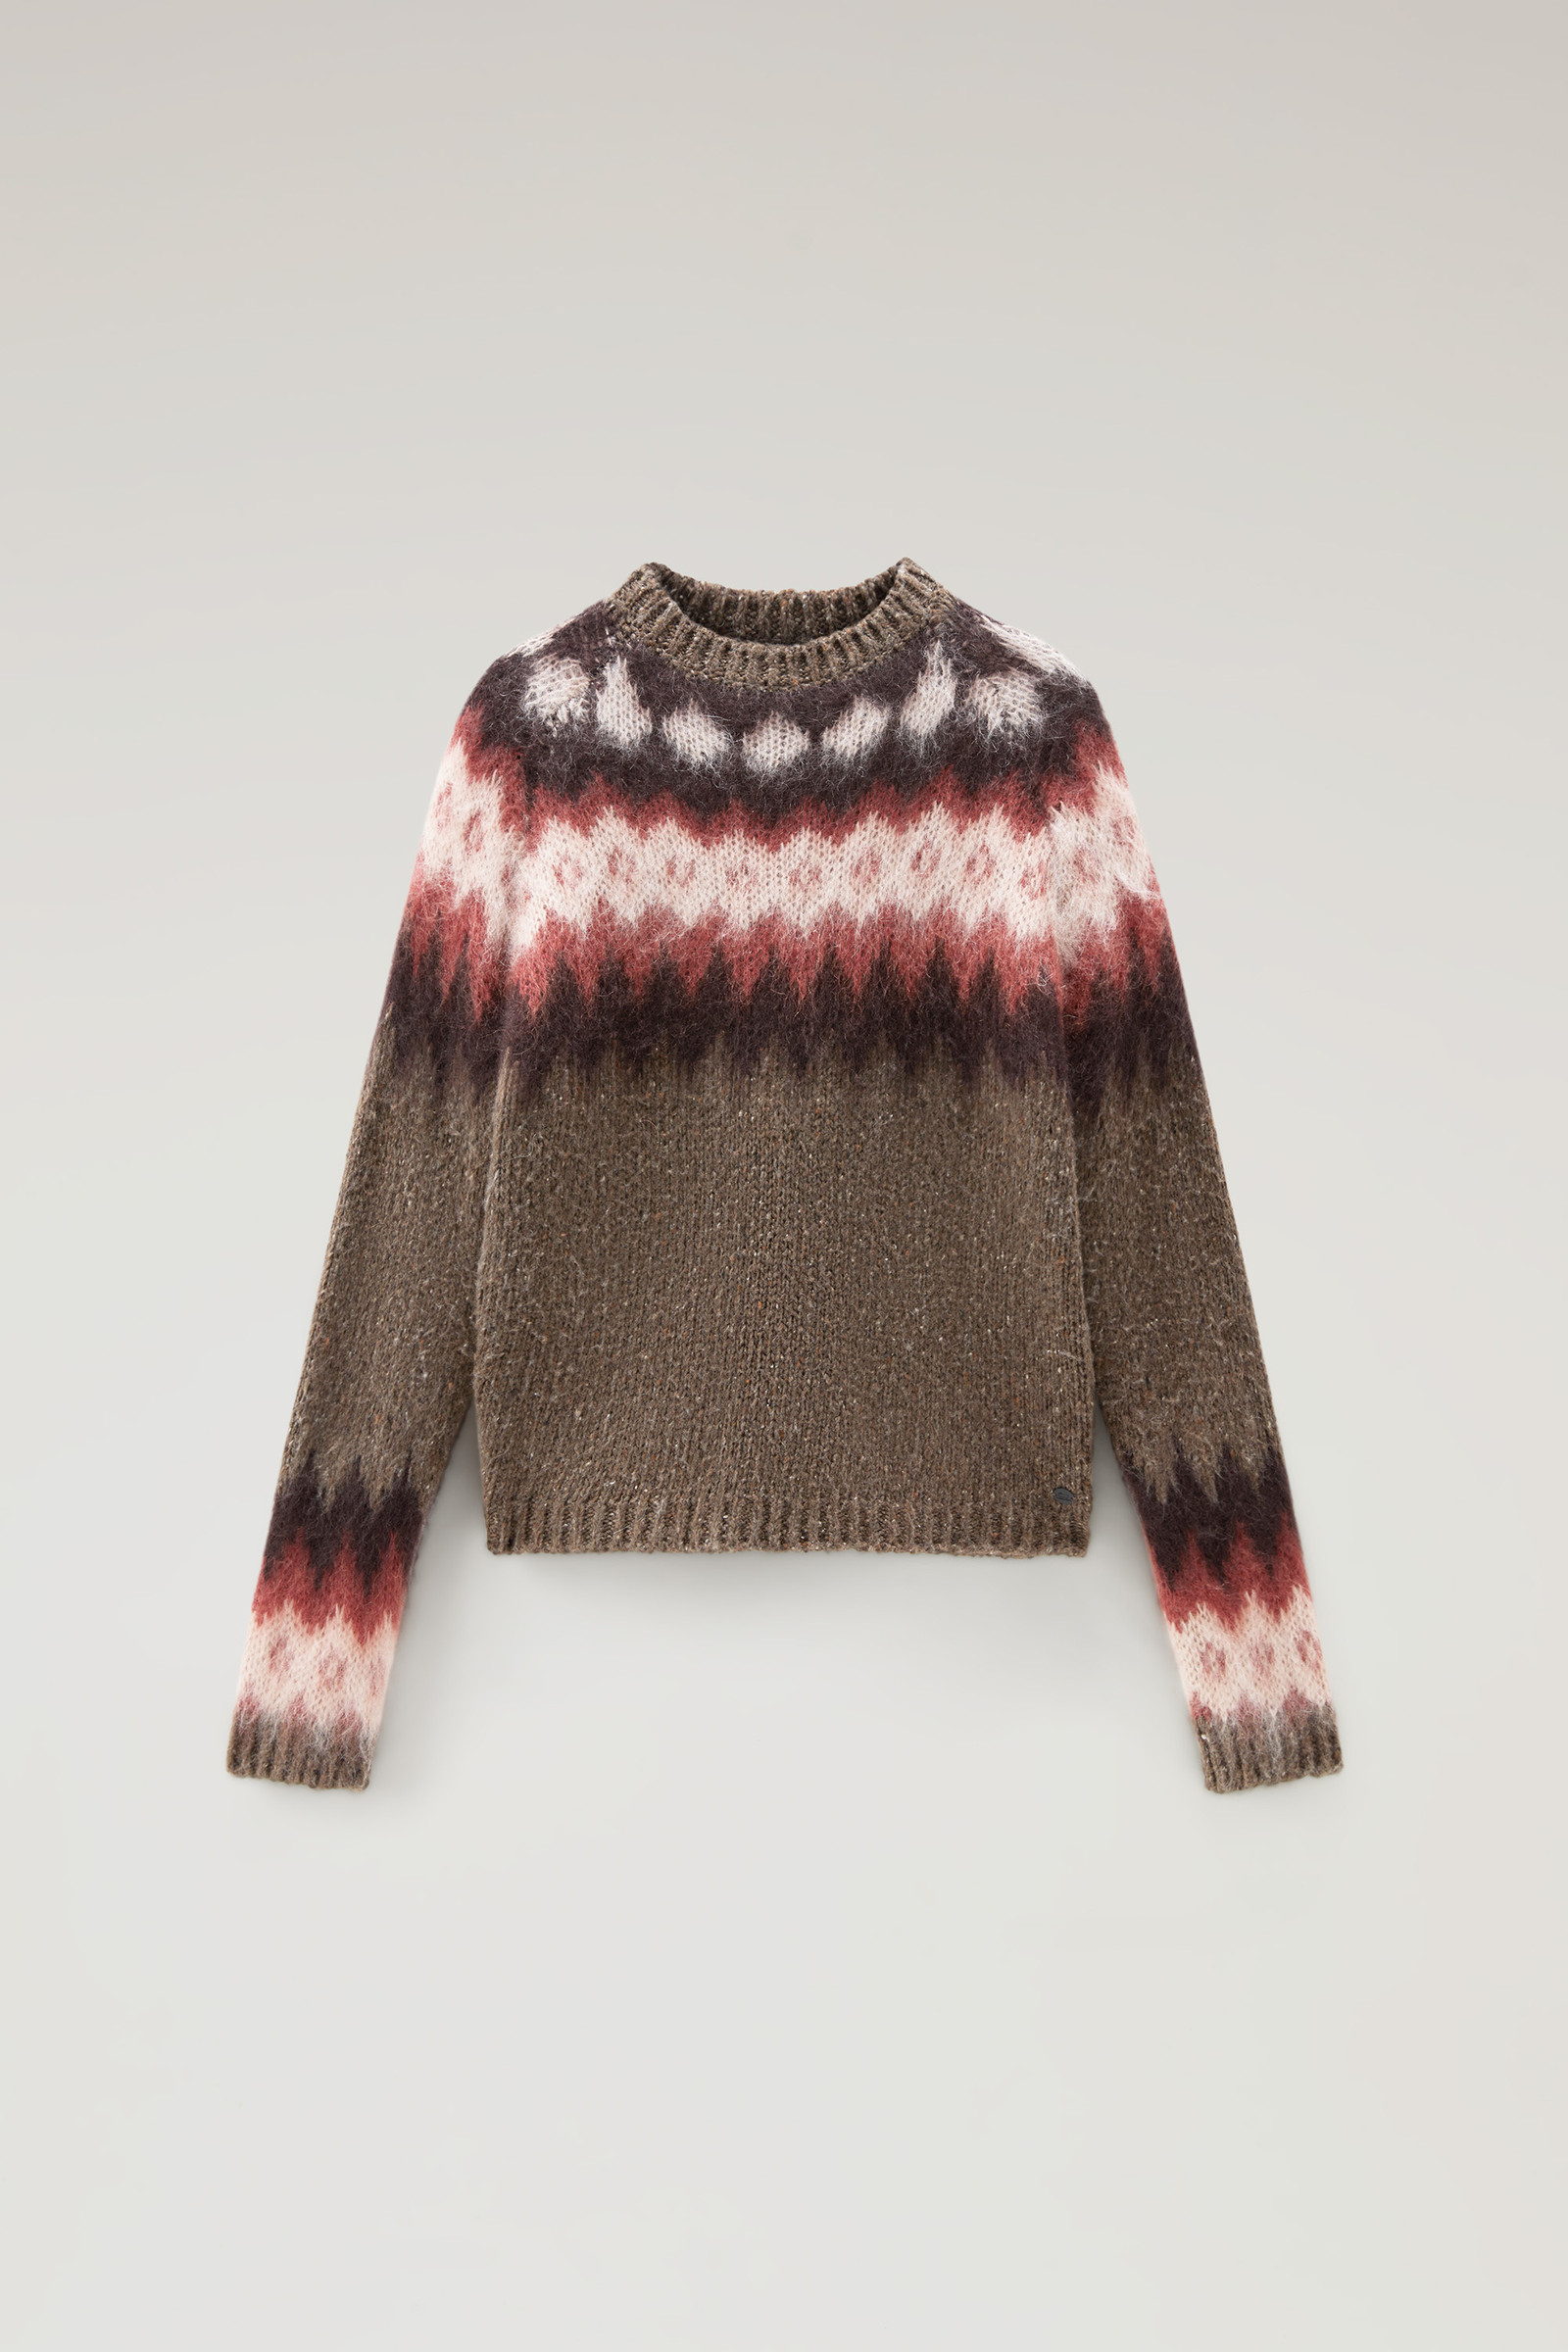 Women's Fair Isle Pullover in Wool and Mohair Blend Brown